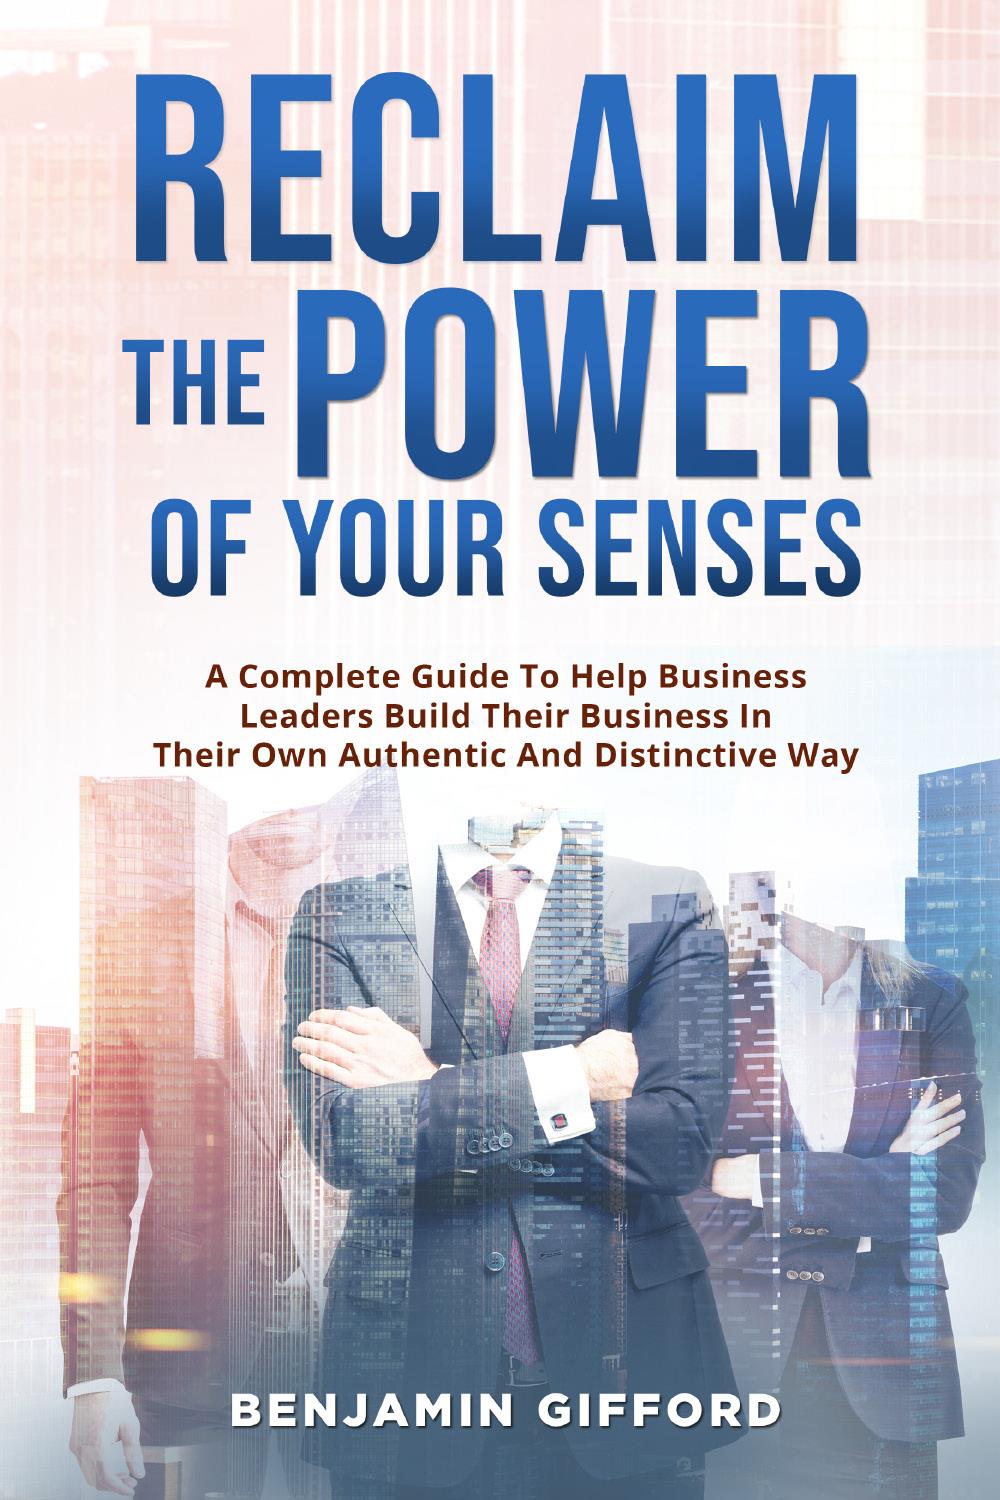 Reclaim the Power of Your Senses. A Complete Guide To Help Business Leaders Build Their Business In Their Own Authentic And Distinctive Way